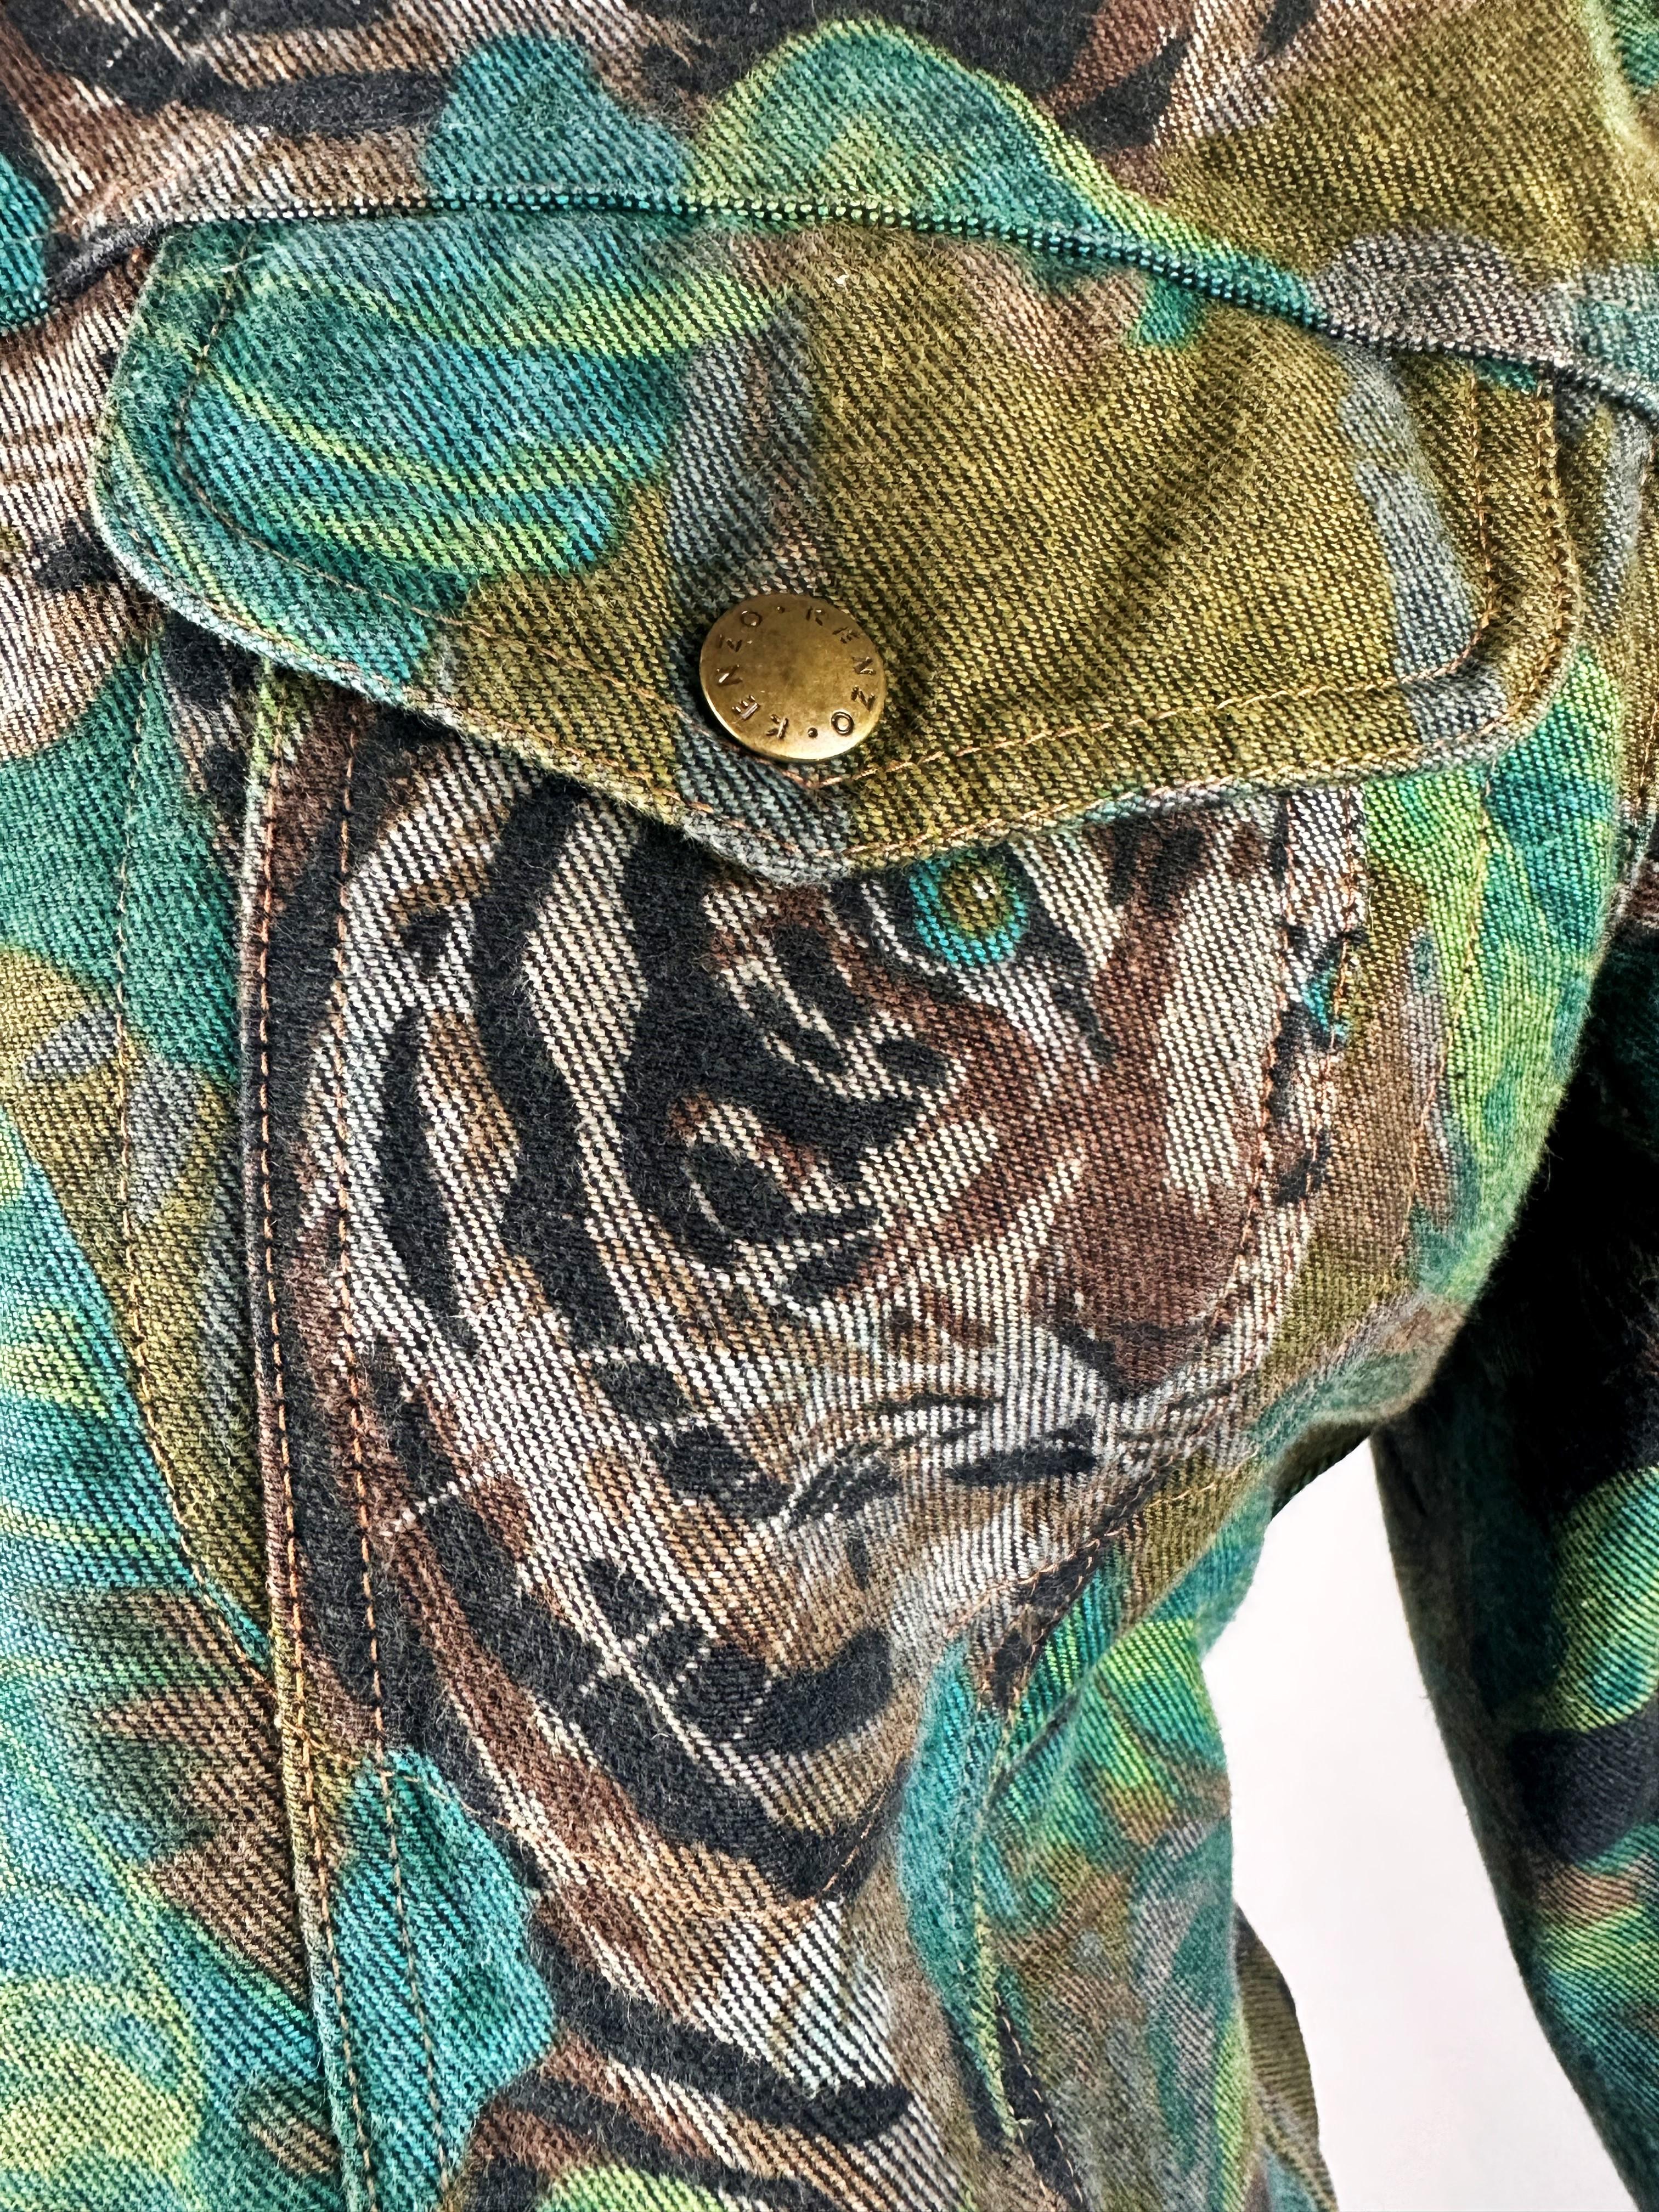 Jacket and Skirt by Kenzo Takada, Jungle & Tiger Print on Denim - French C. 1990 For Sale 1